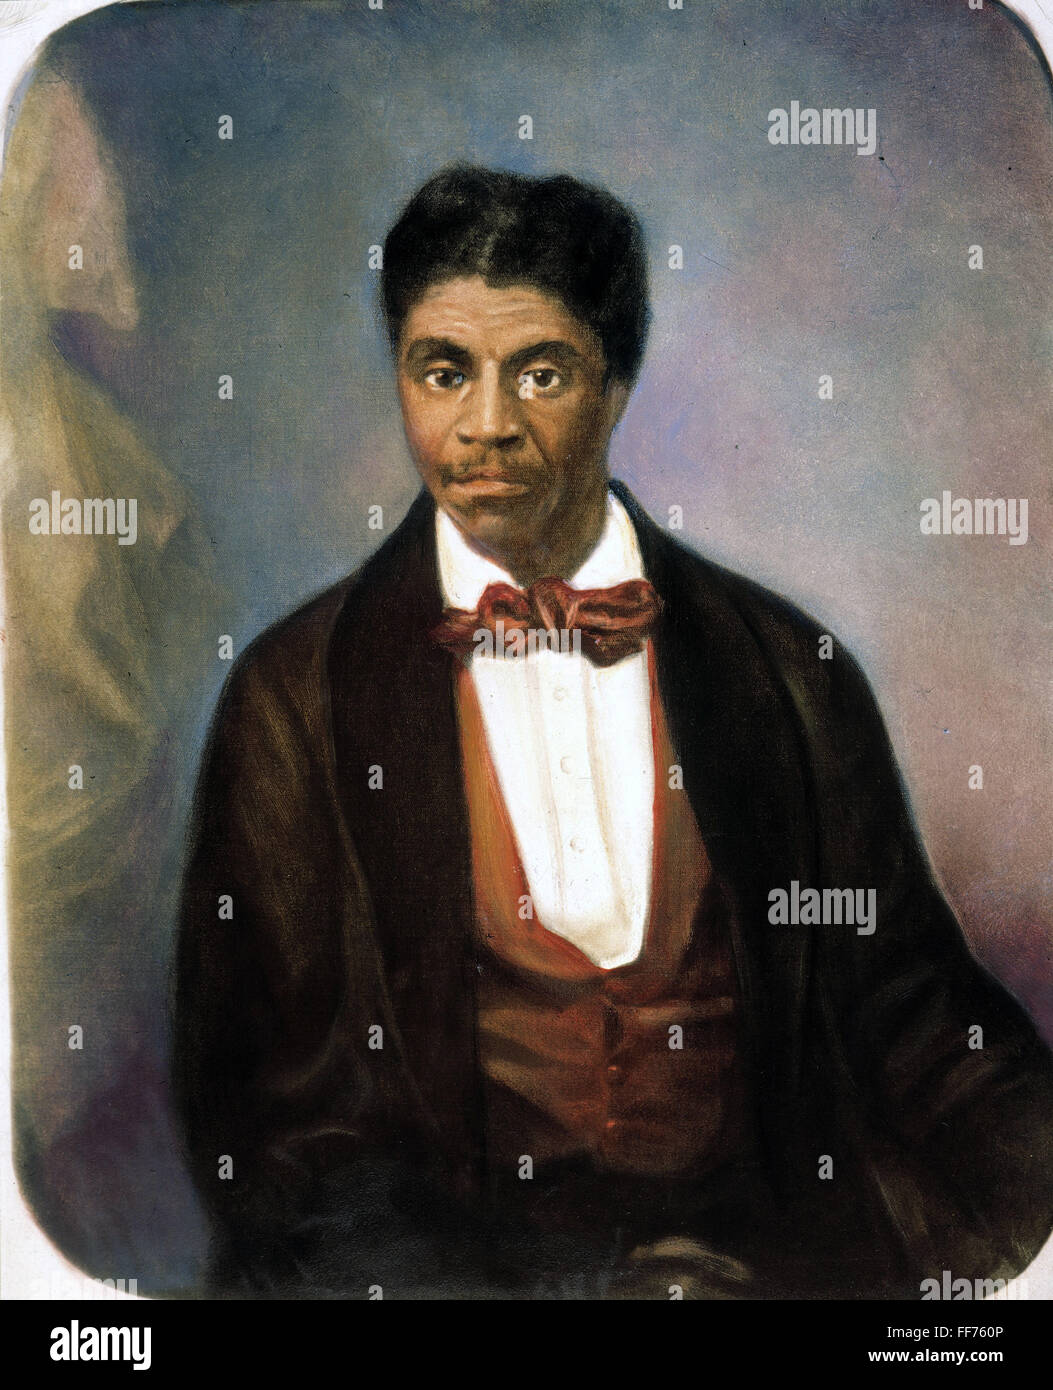 DRED SCOTT (1795?-1858). /nAmerican slave. Painting after a photograph, c1858. Stock Photo